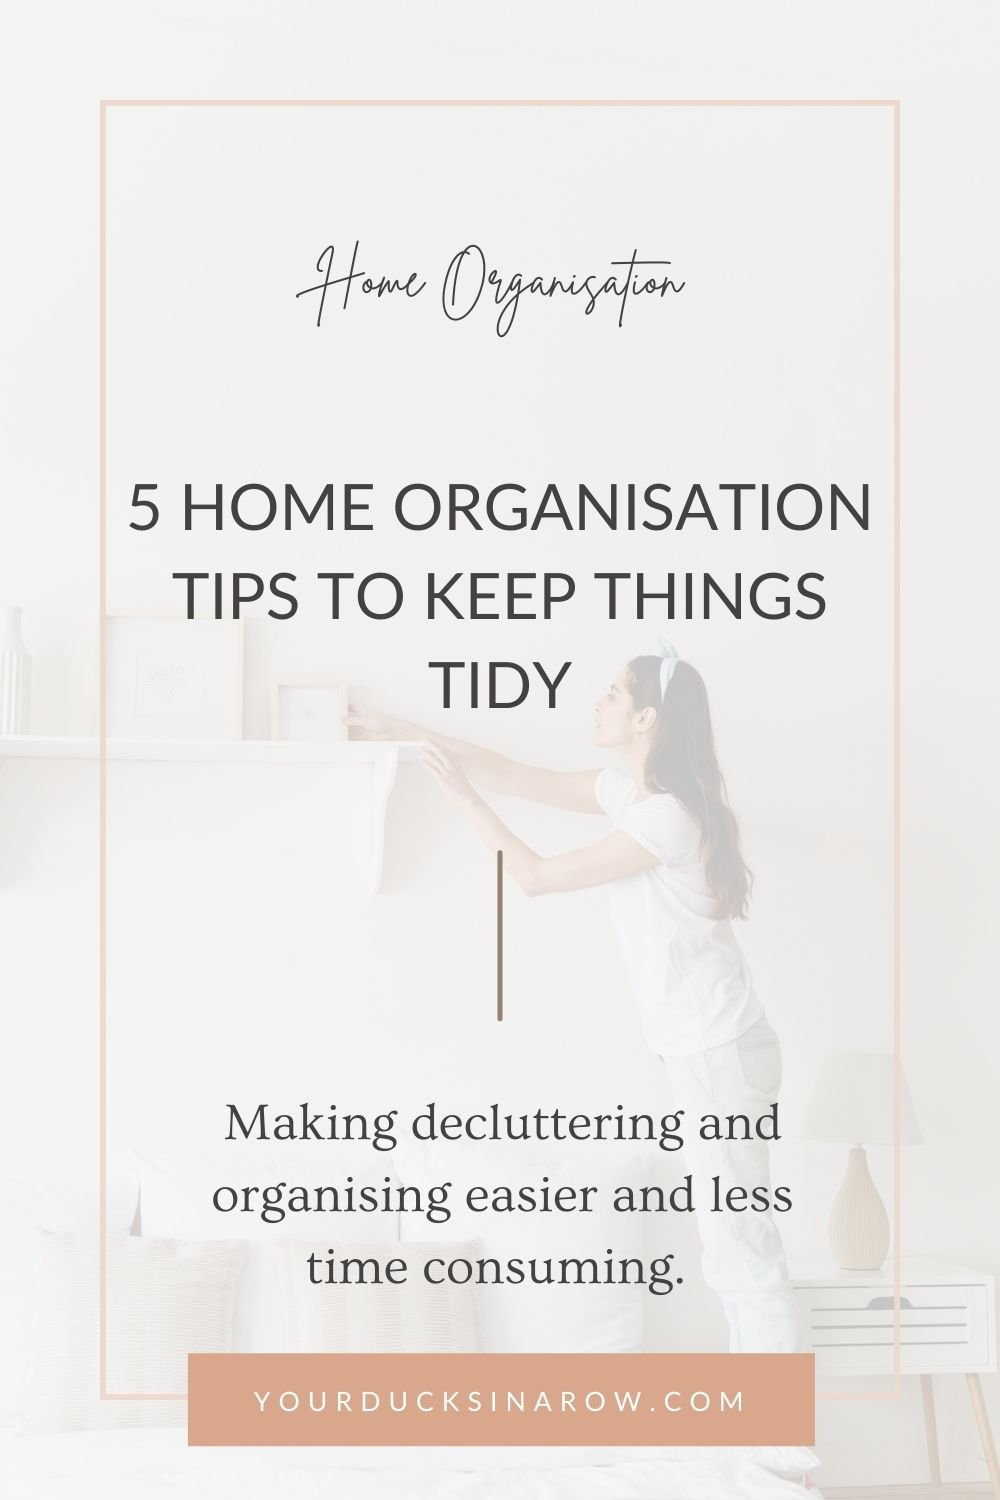 Home Organisation Tips for Your Home